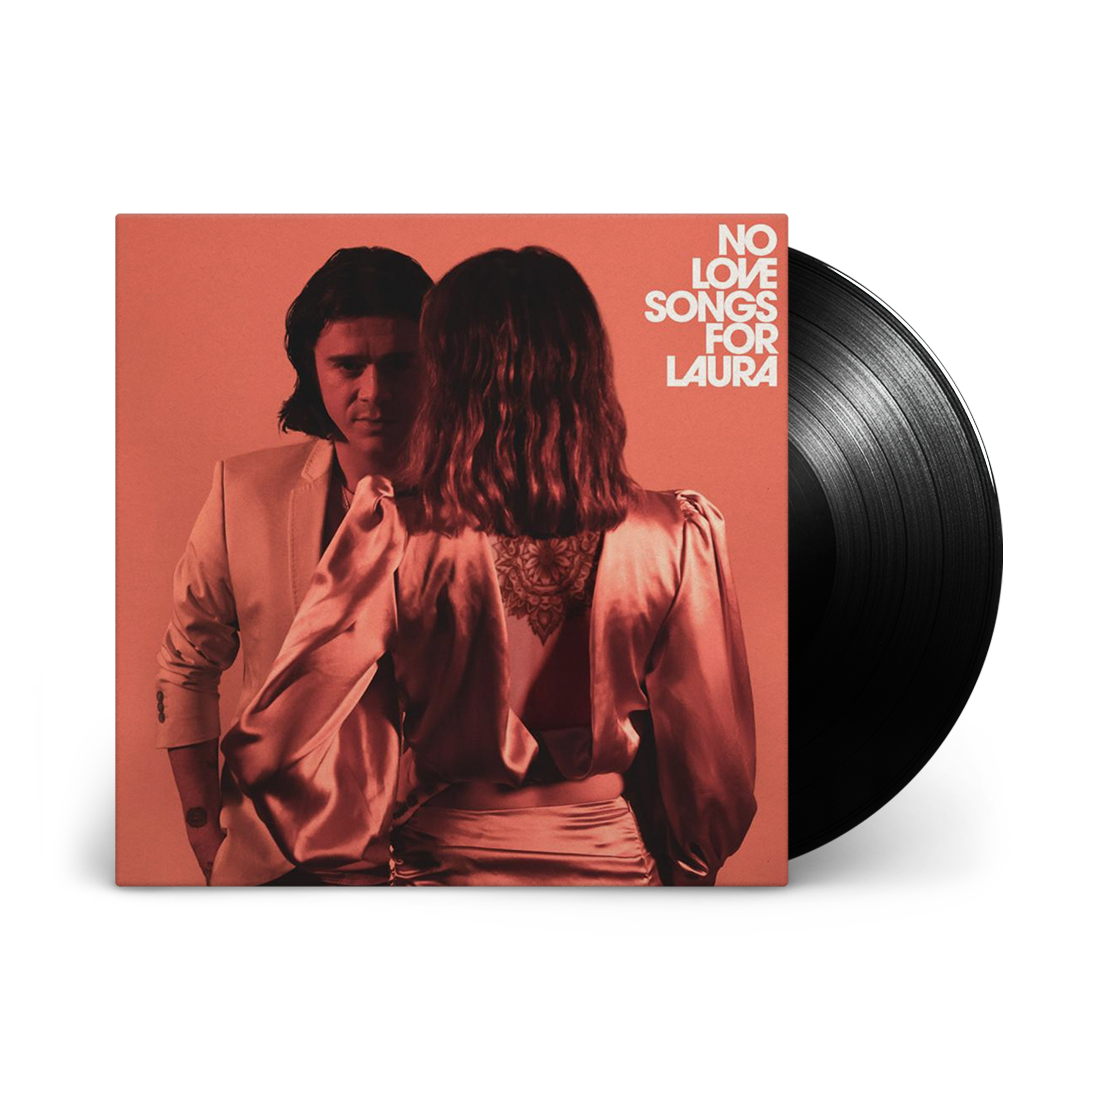 Kyle Falconer - No Love Songs For Laura: Signed Vinyl 2LP.